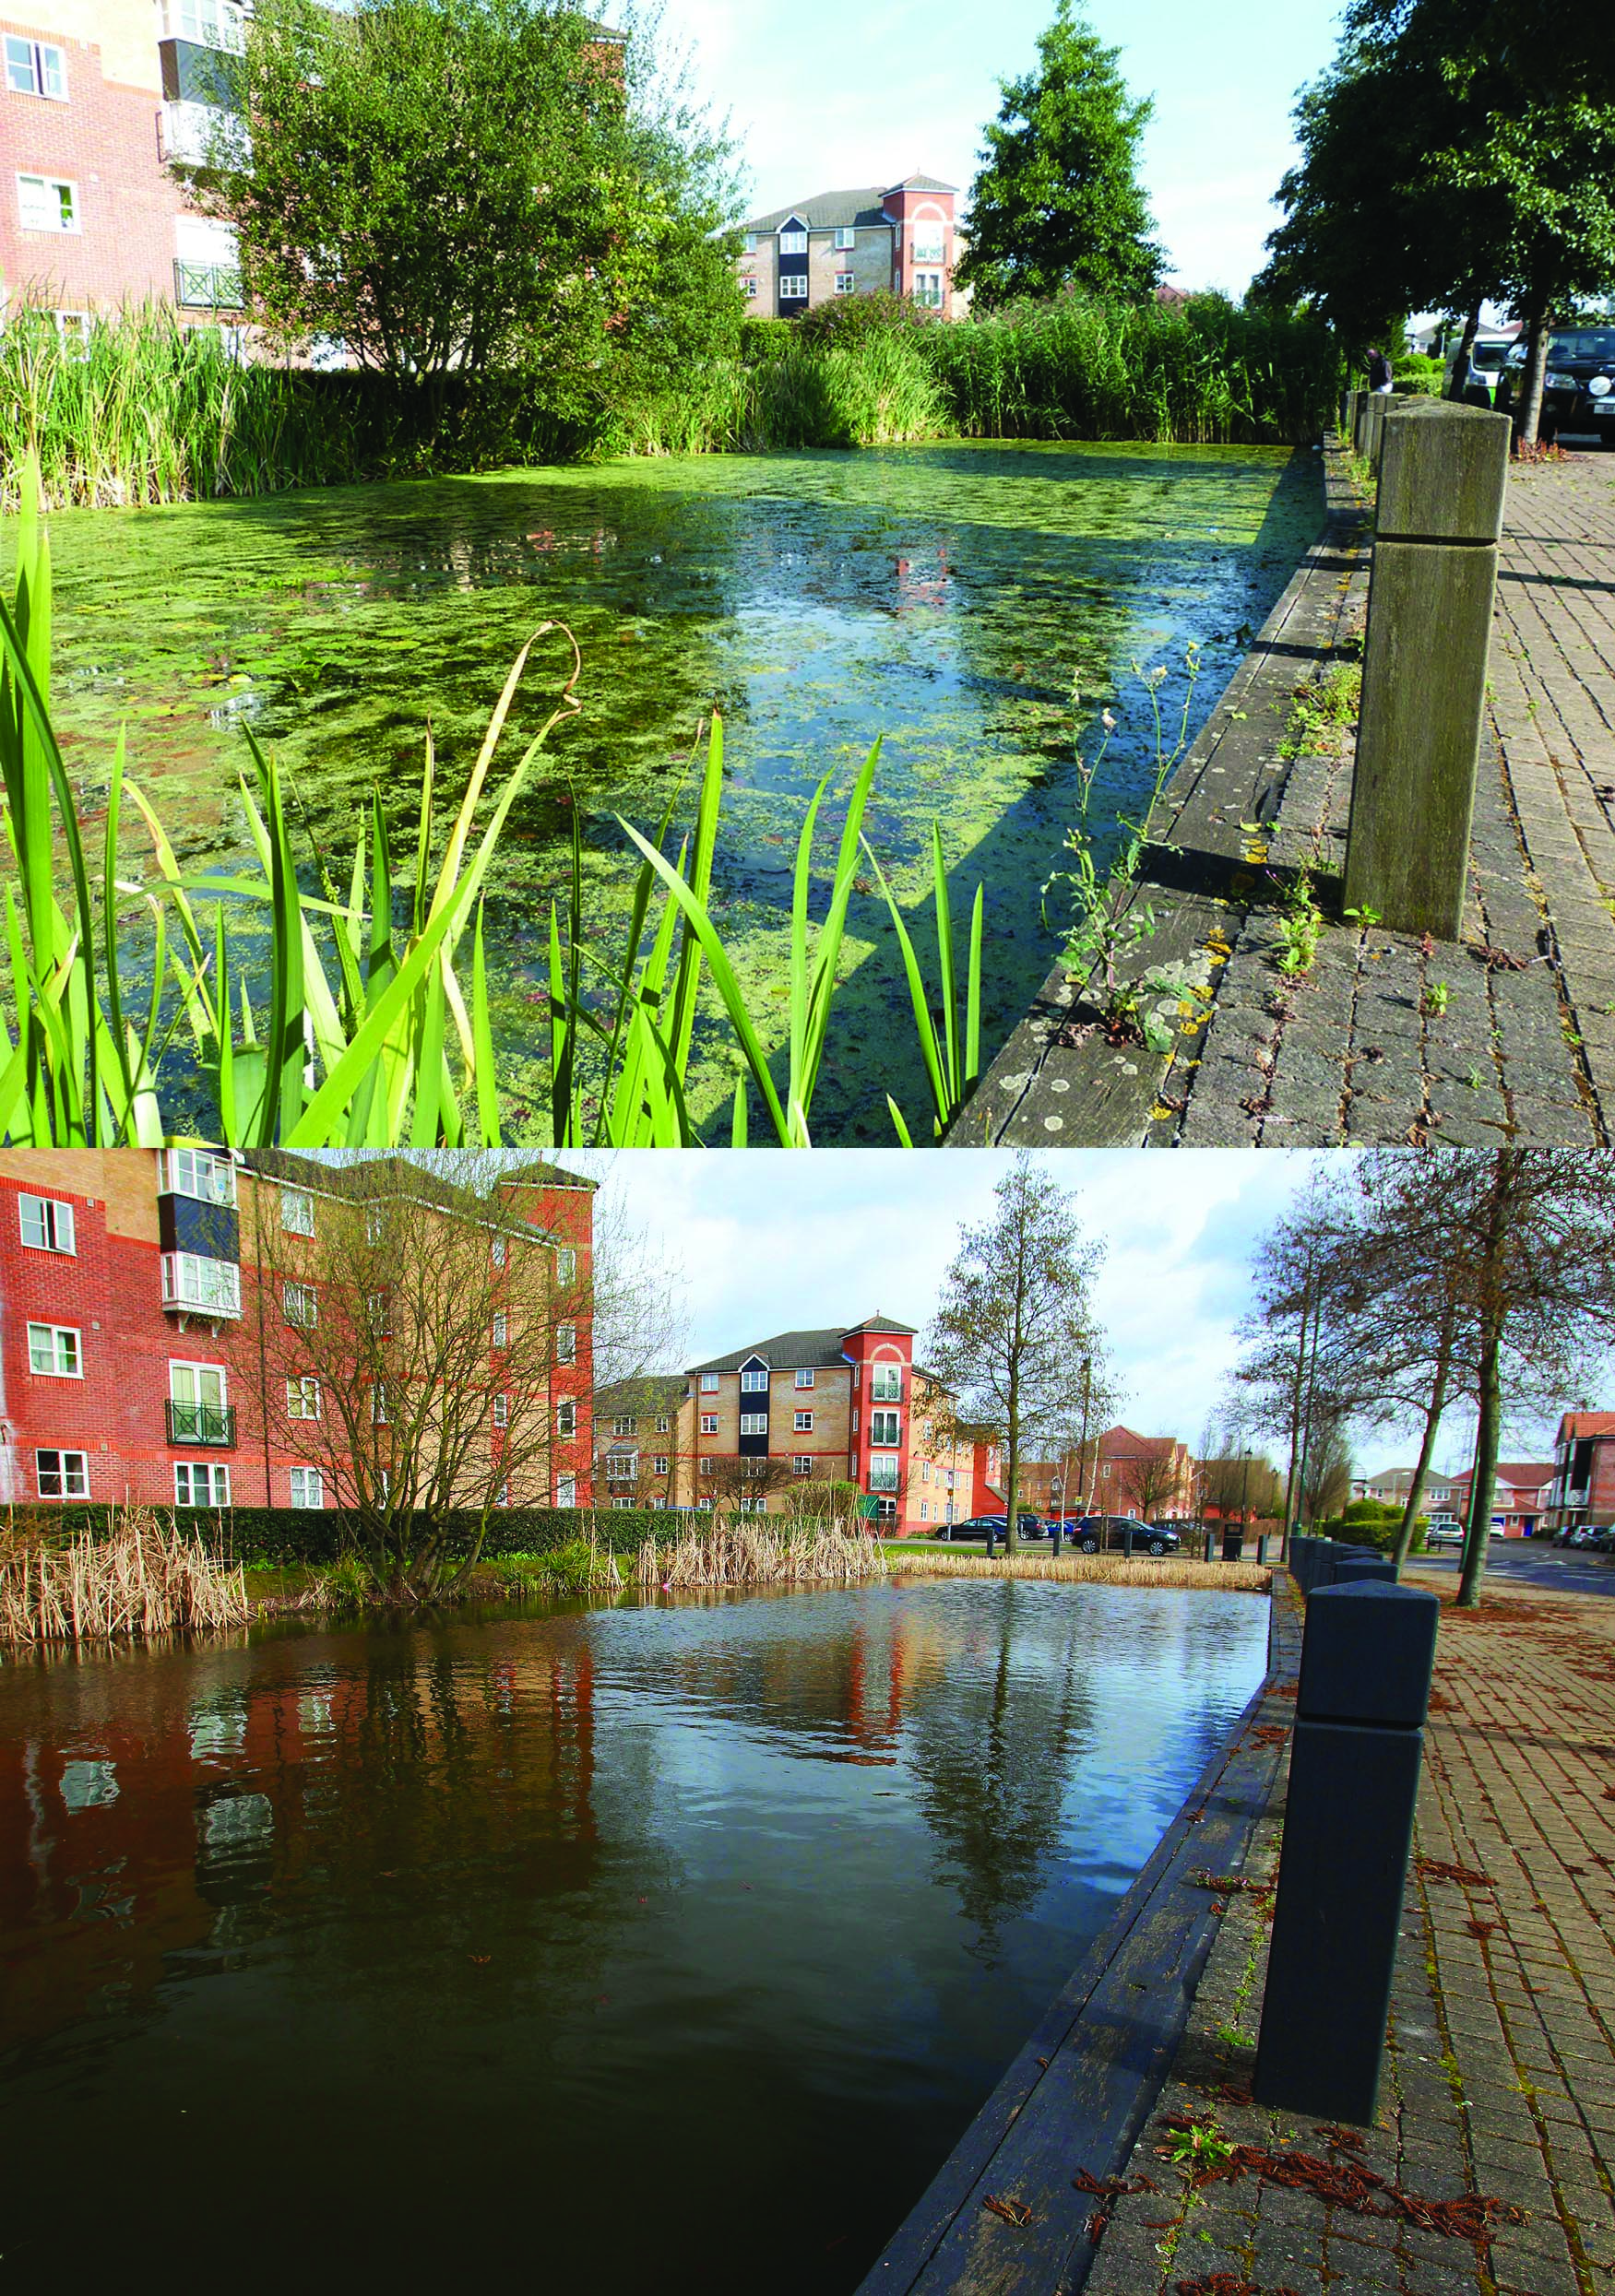 These before and after shots show how canals and lakes can be transformed with Otterbine aerators.